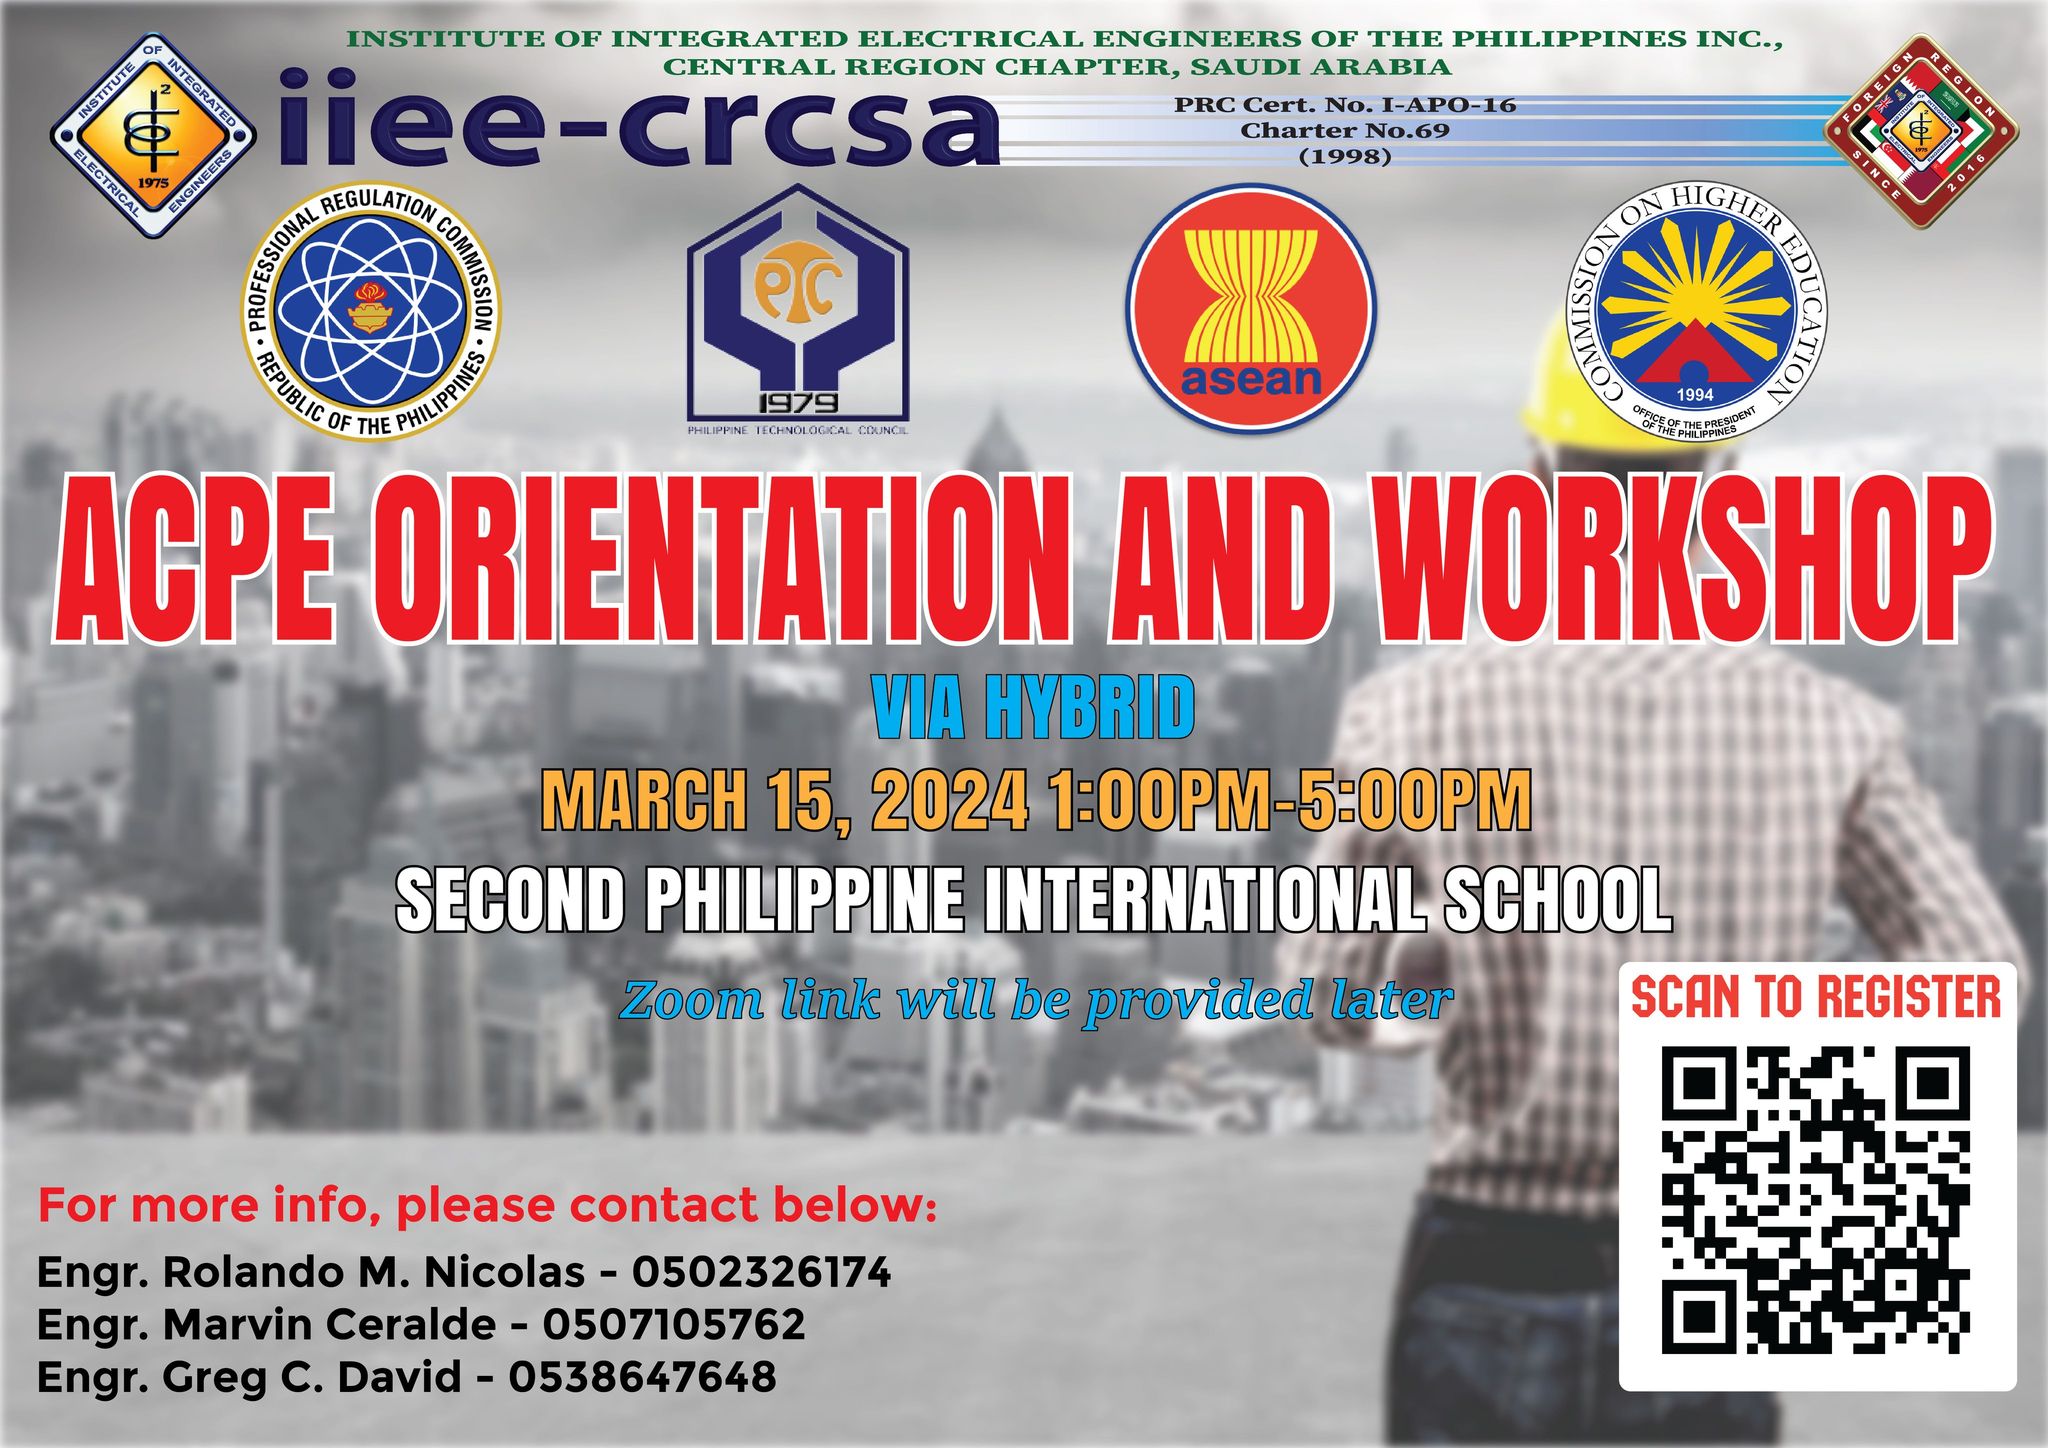 ACPE Orientation and Workshop